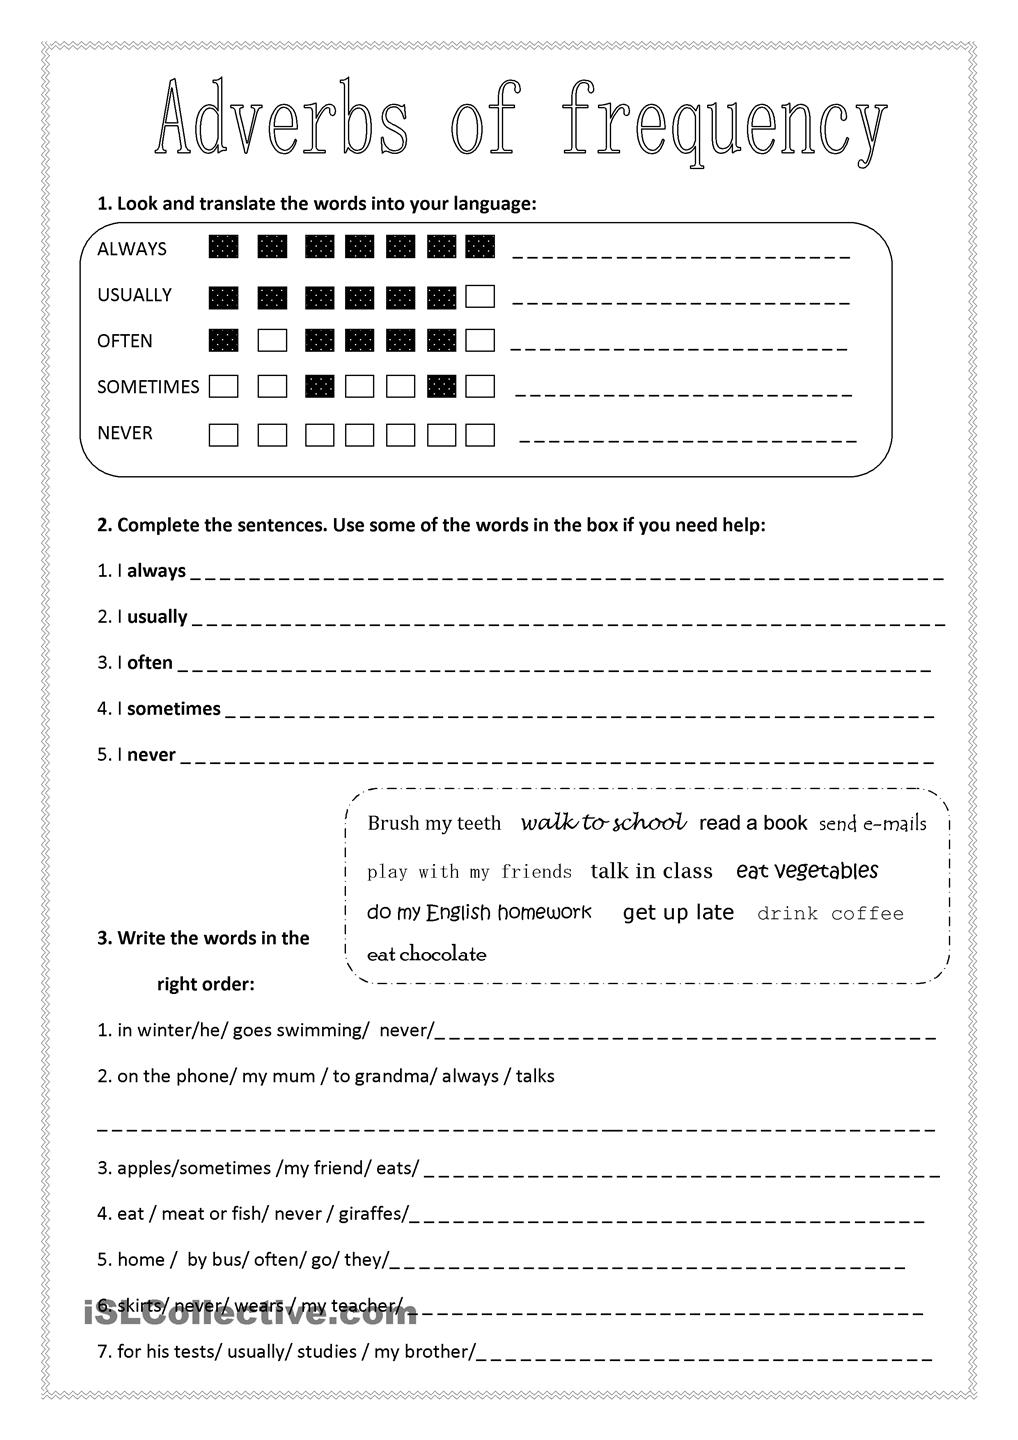 Adverbs Of Frequency Free Printable Worksheets